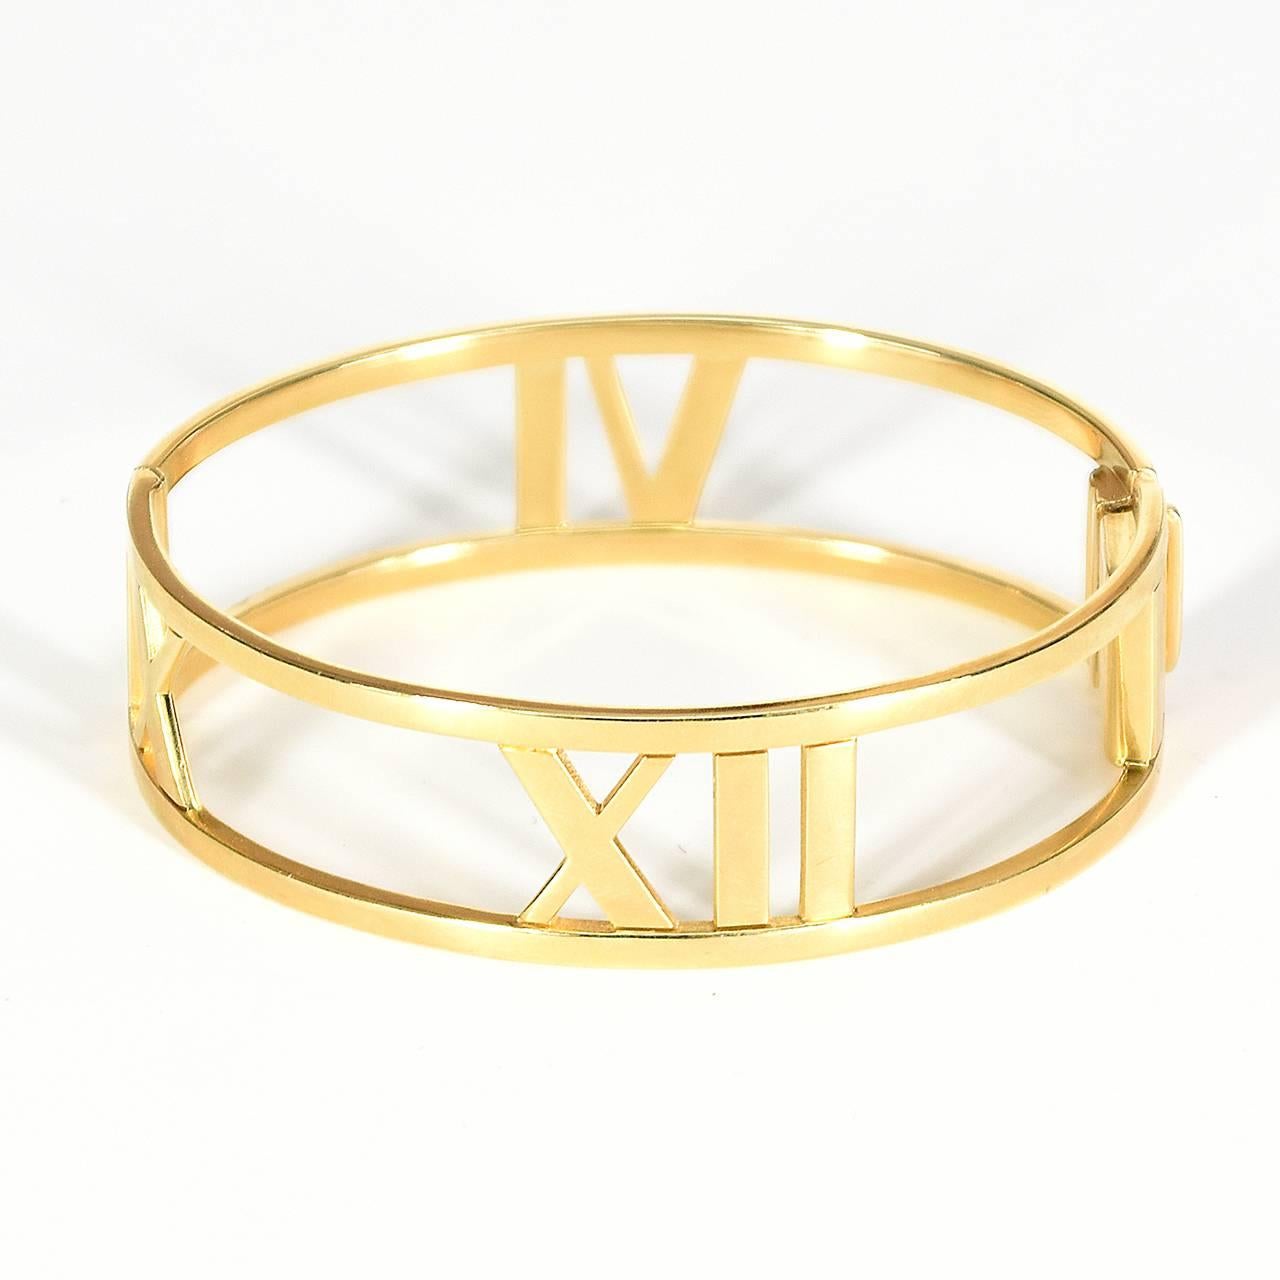 18ct yellow gold medium sized 'Atlas' hinged bangle with a design of Roman Numerals.  The outer band of the bangle is stamped T. & Co. AU 750 Italy together with Atlas and the copyright symbol.
Independent valuation in Australian dollars